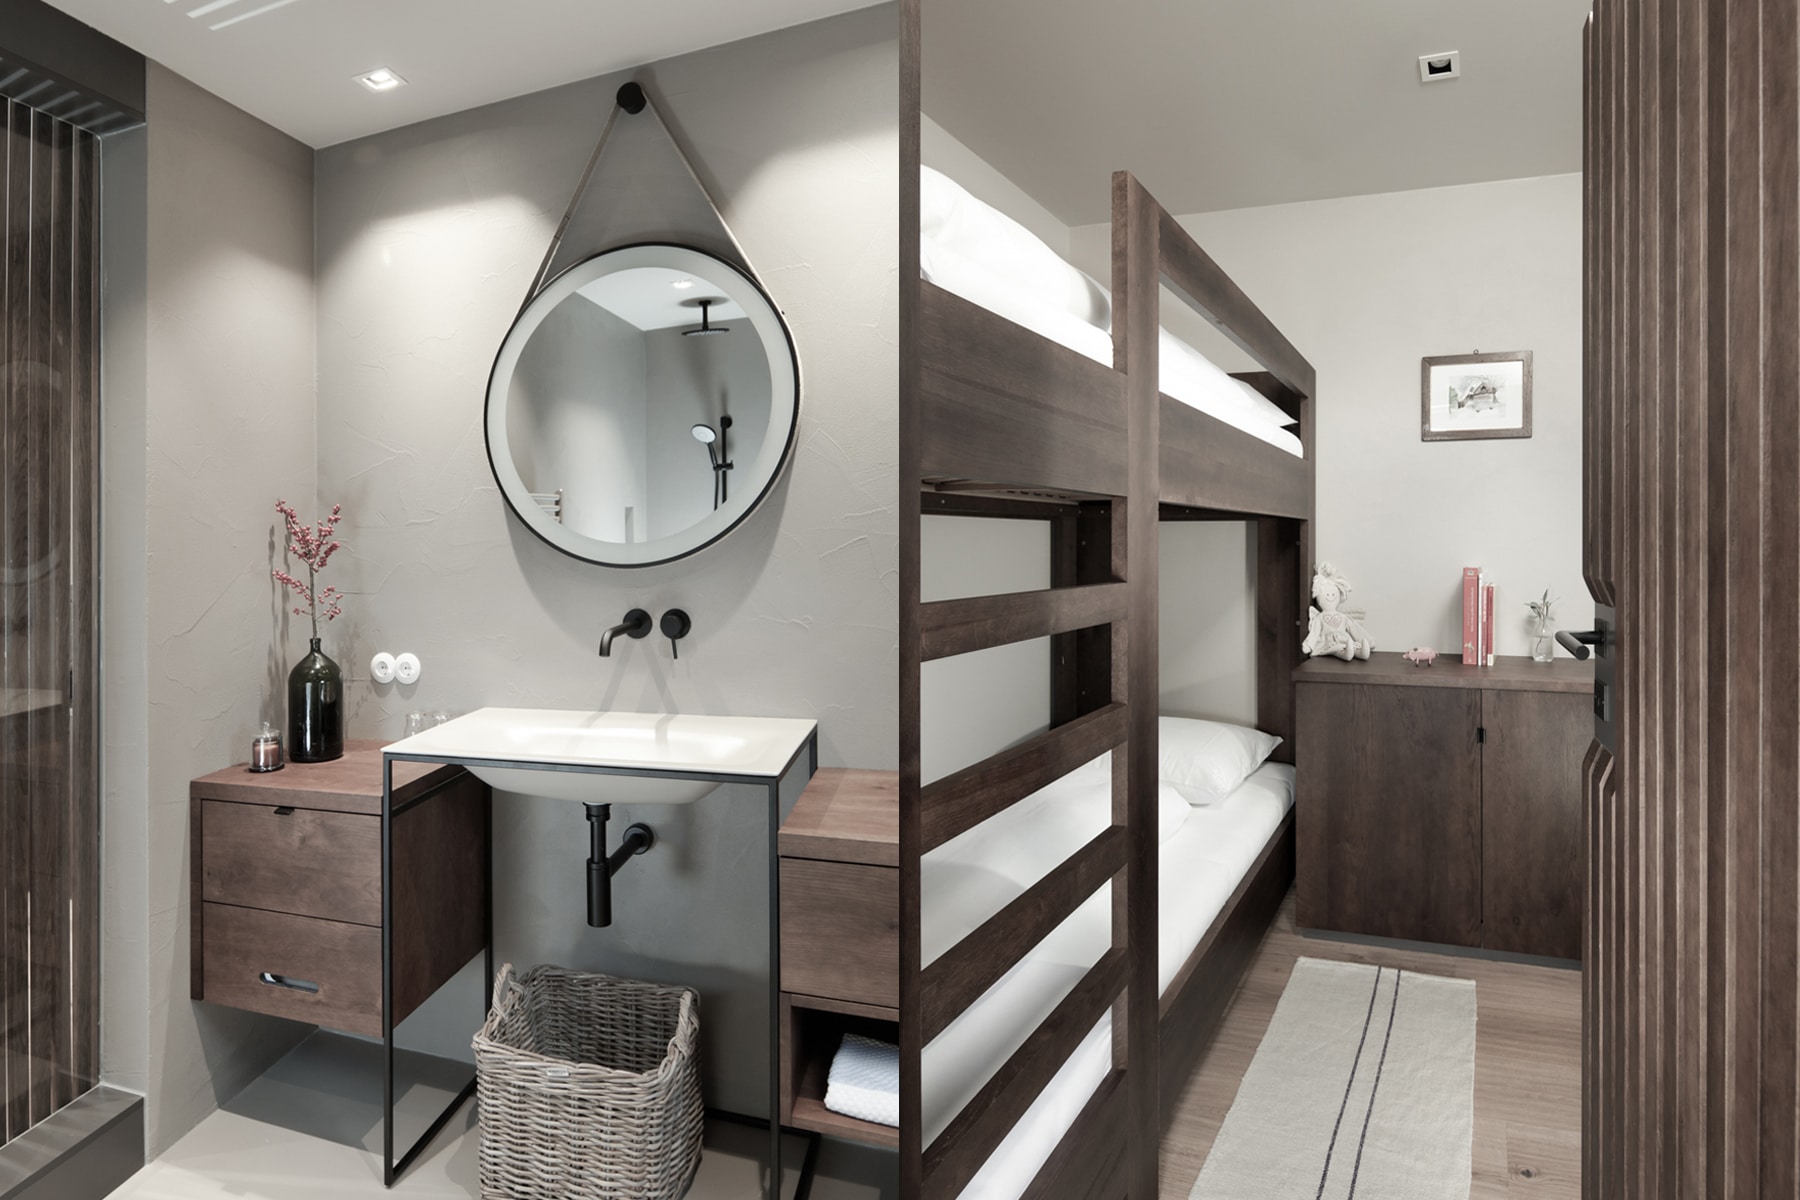 A modern bathroom with a clean, minimalist design featuring a round mirror, a sleek vanity, and a bunk bed integrated into the space, blending functionality with style.